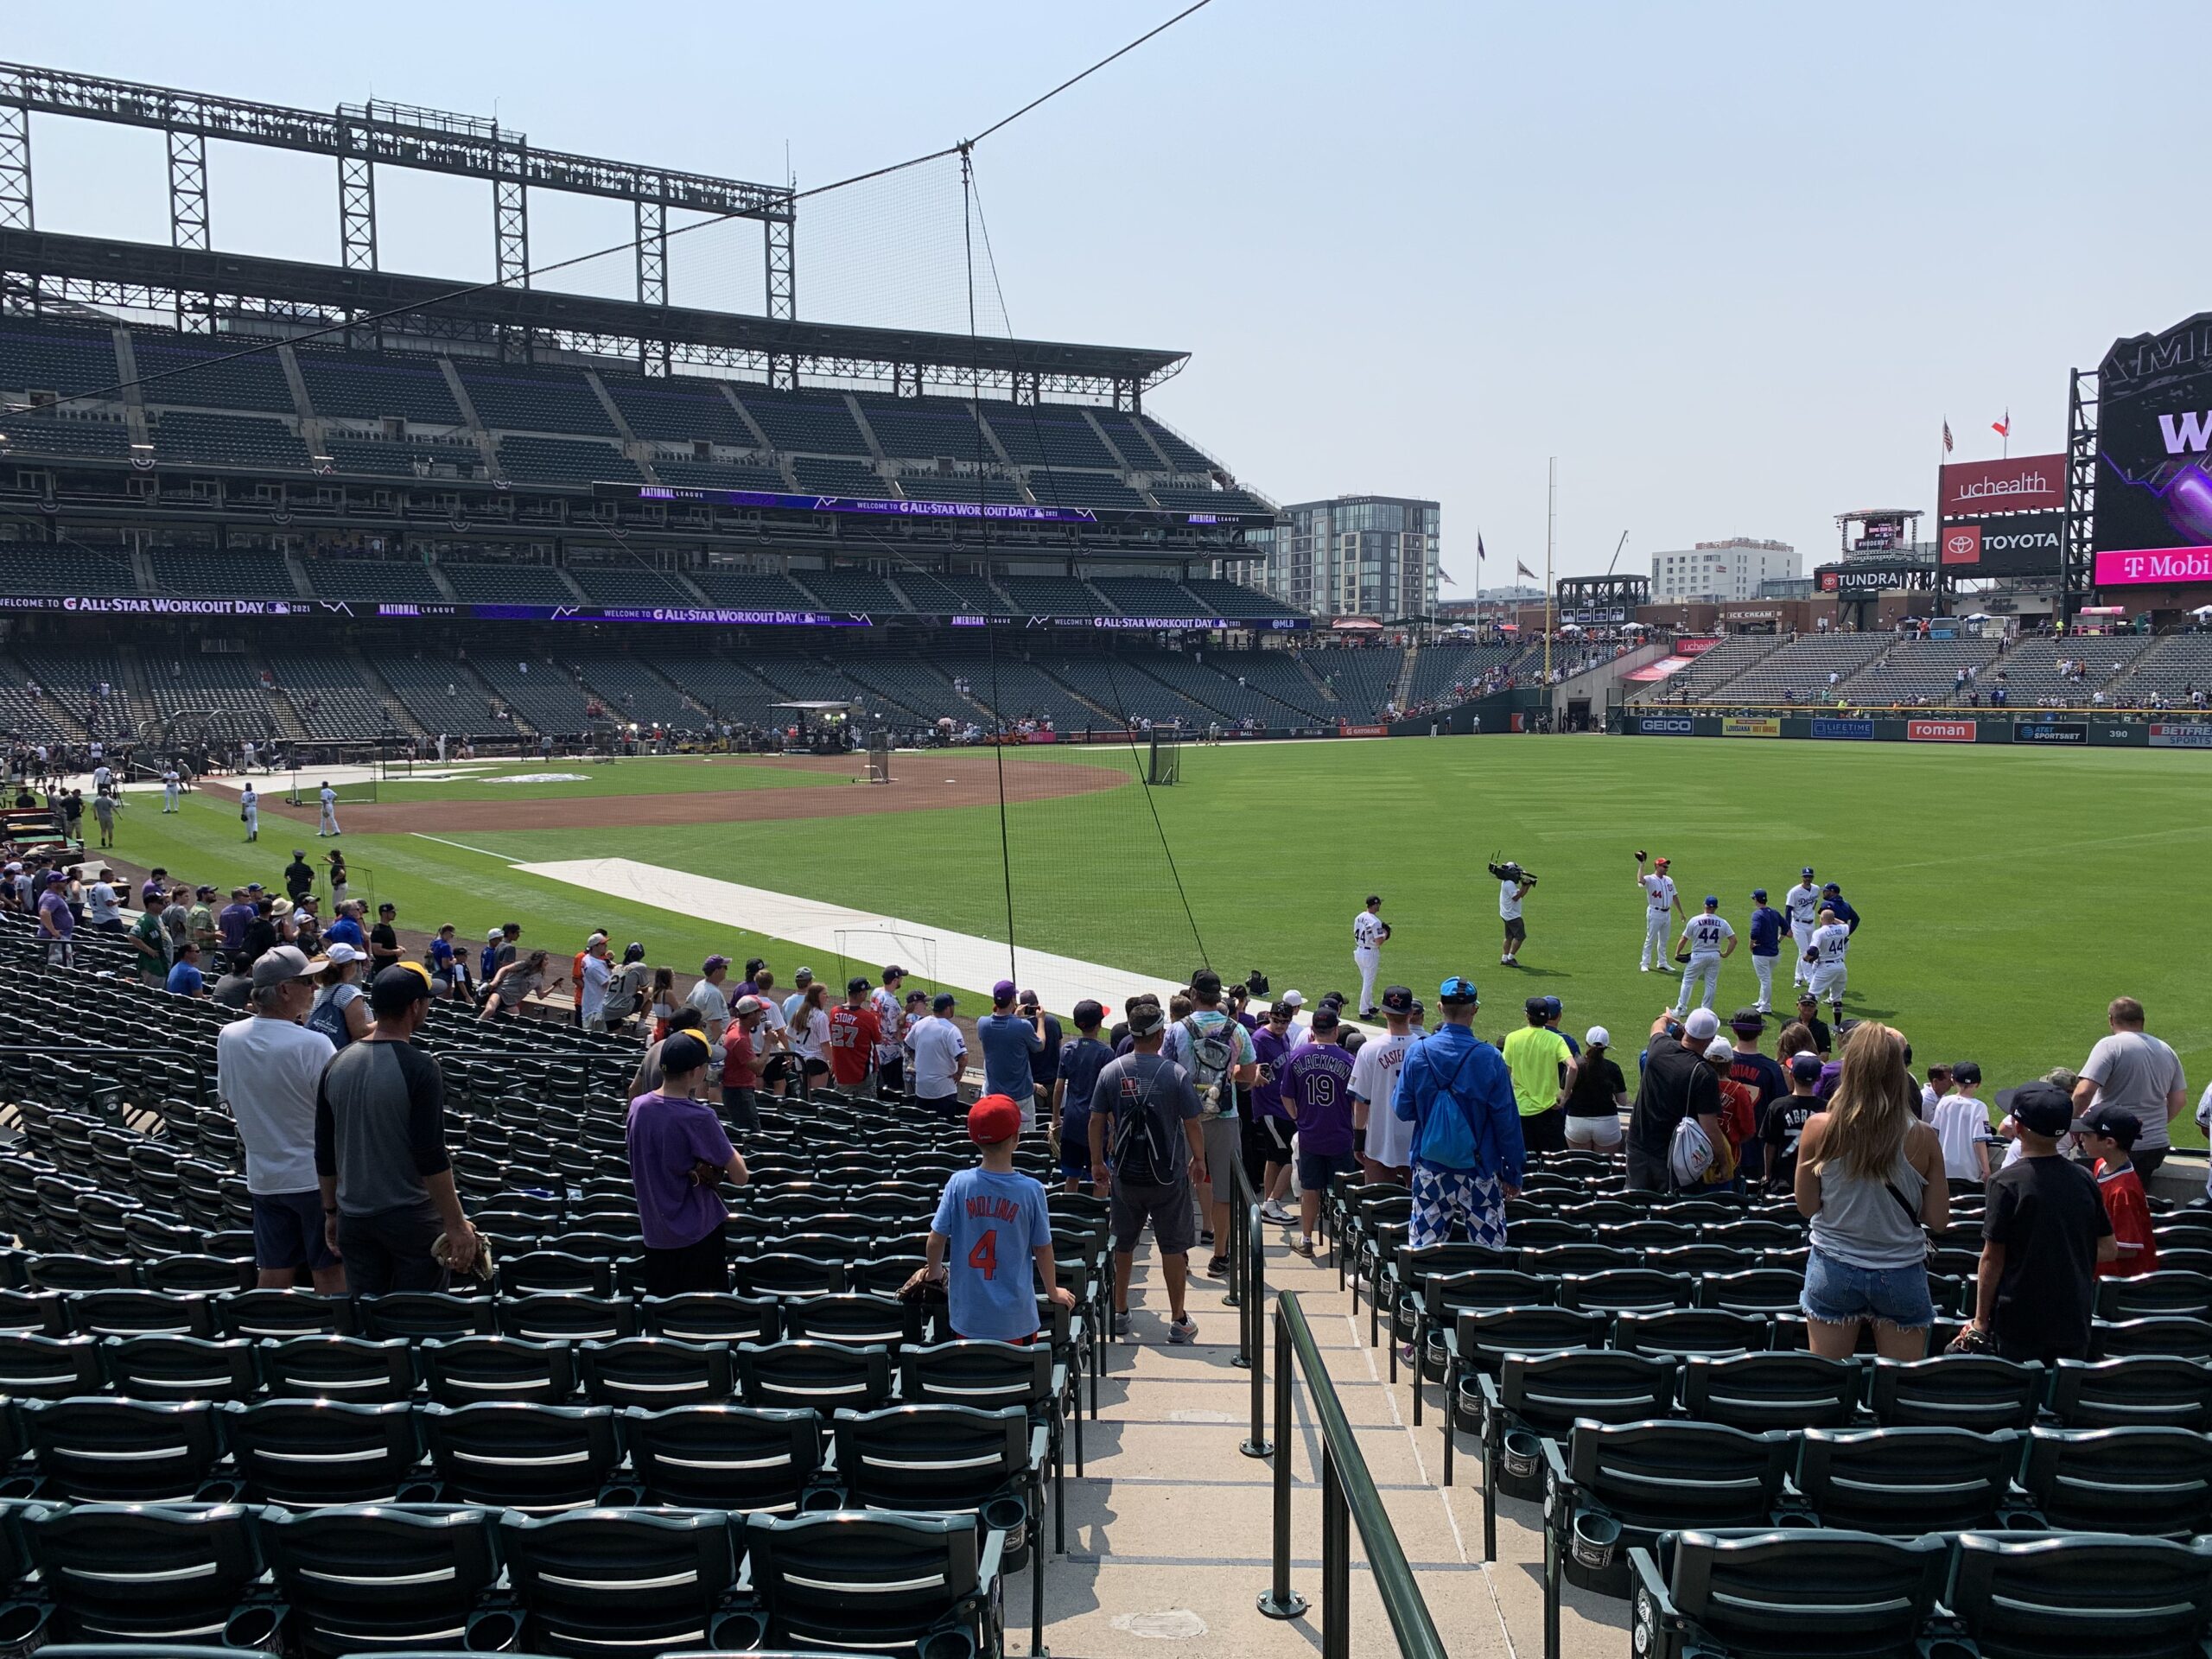 Fans looking for autographs during the 2021 All-Star Game Workout before the Home Run Derby.